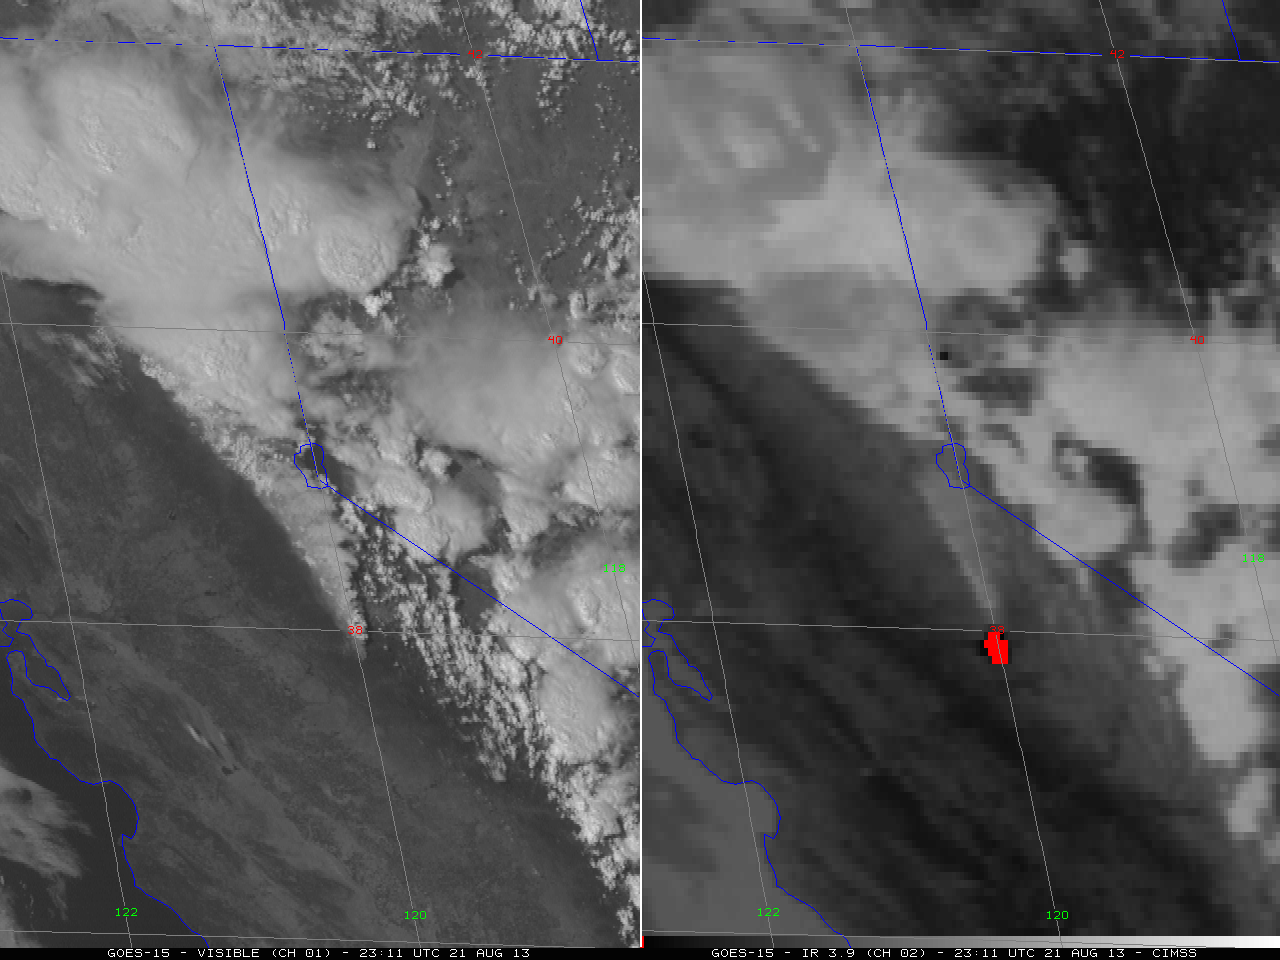 GOES-15 visible (left) and shortwave infrared (right) imagery (click image to play animation)